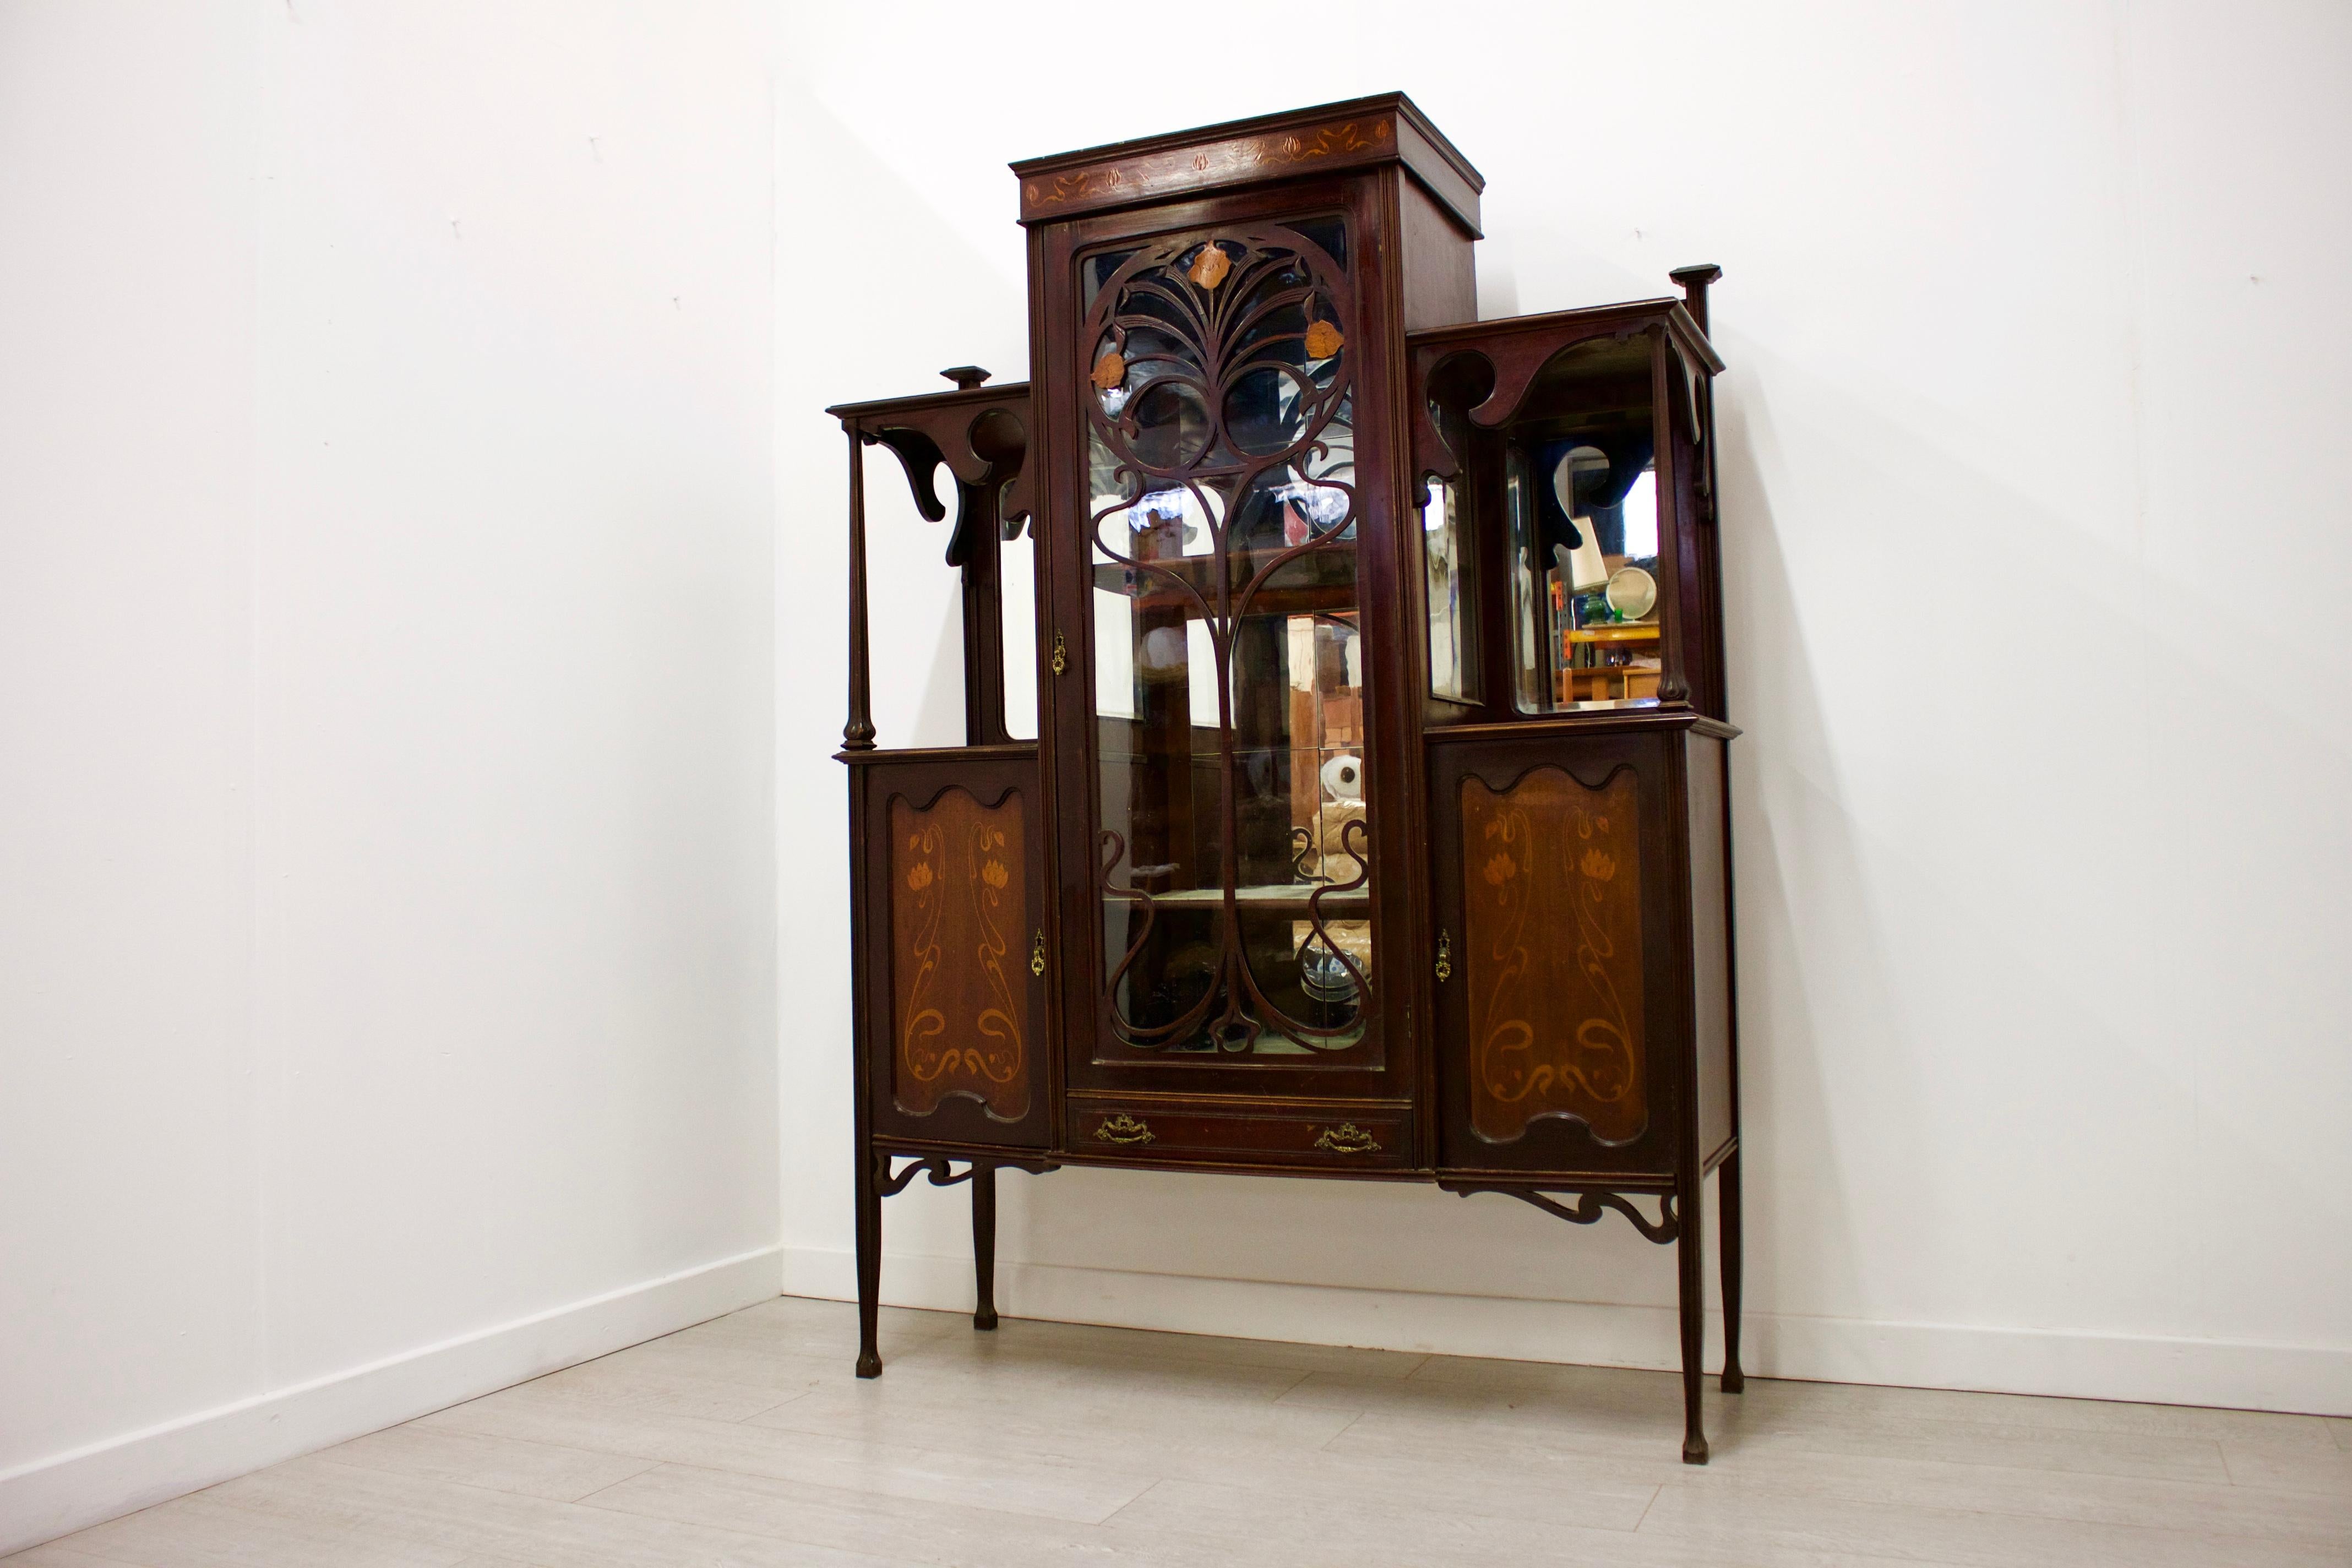 Art Nouveau display cabinet, in the manner of Shapland & Petter.
- Made from mahogany, inlaid with satinwood.
- Features central glazed cabinet, overlaid with a whiplash design
& Iris flower.
- Flanked by Marquetry panelled doors.